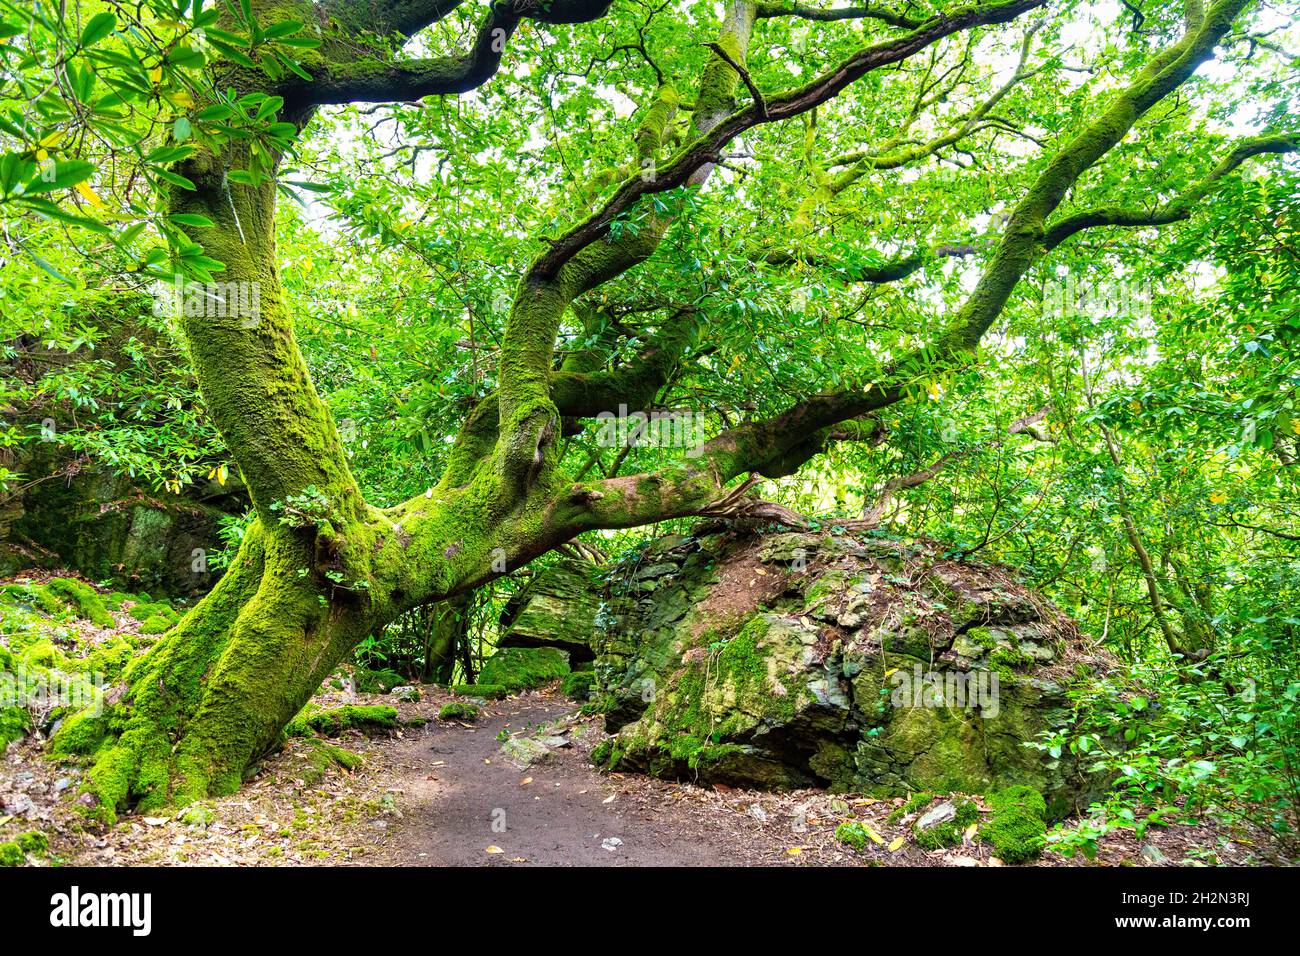 Tree covered in moss along a path in Morfa Harlech Nature Reserve near Portmeirion, Snowdonia, Wales, UK Stock Photo